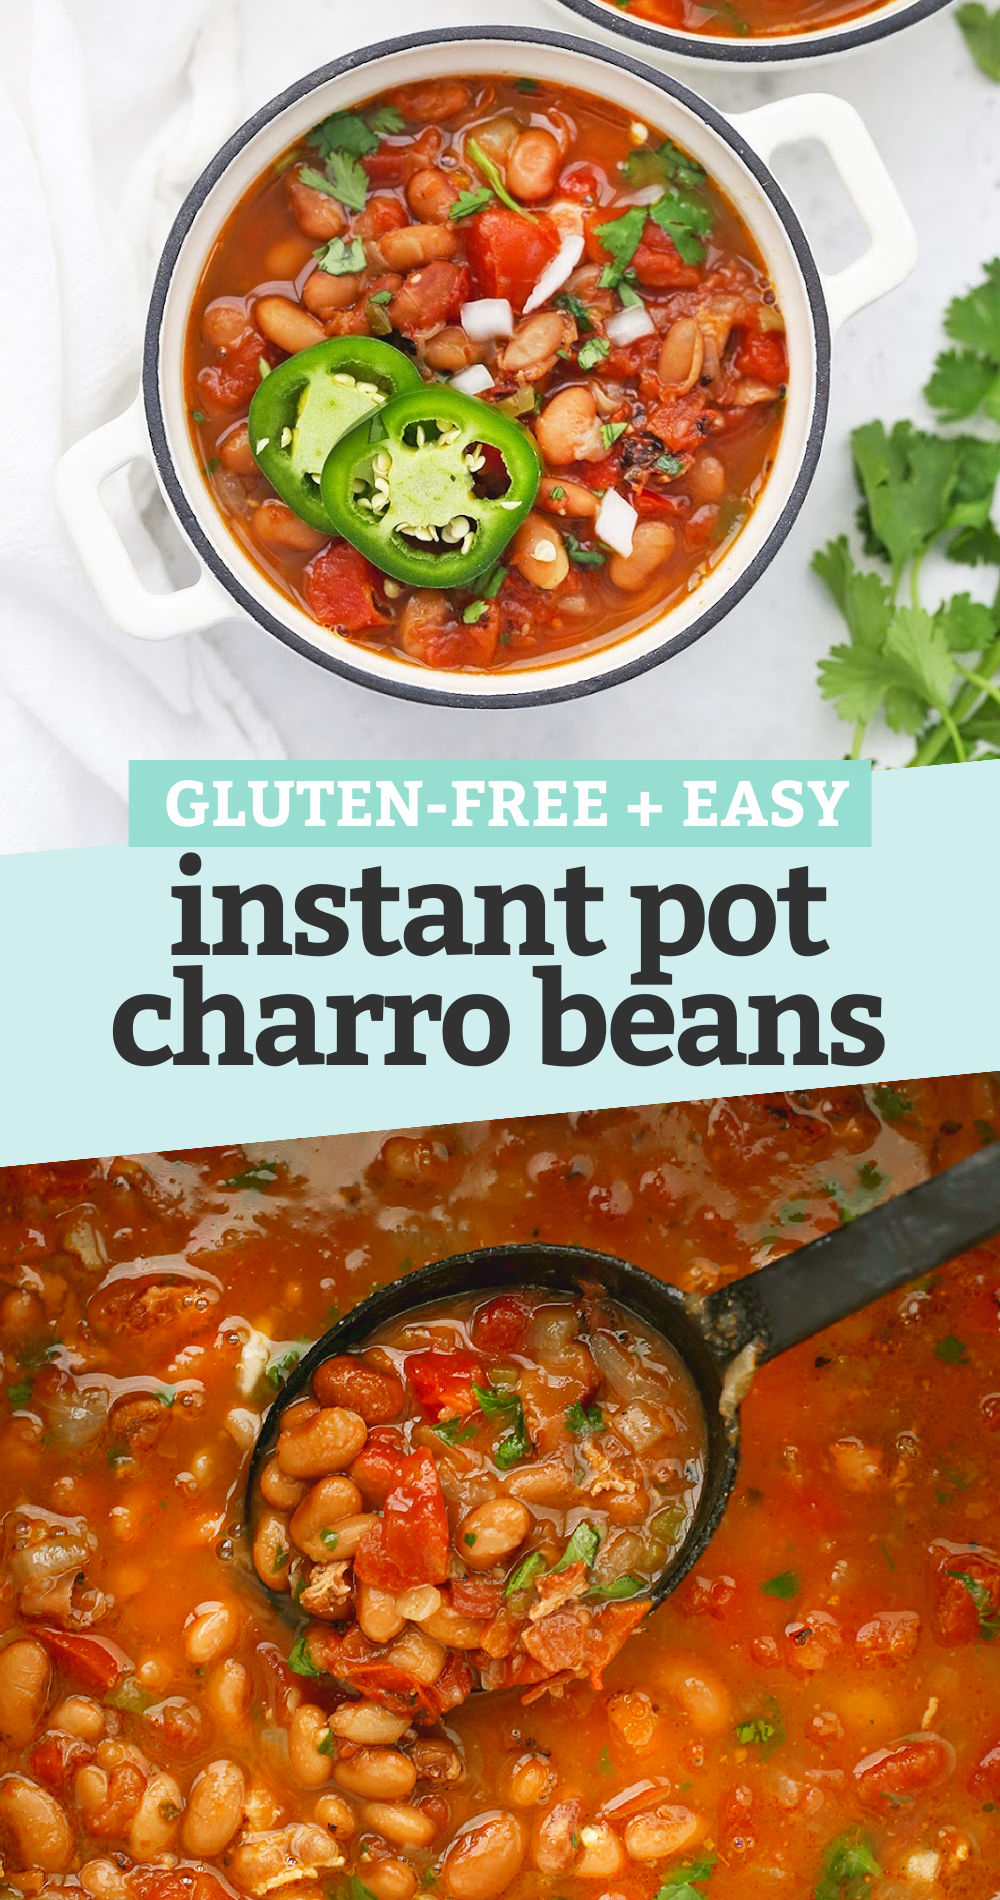 Collage of images of Instant Pot Charro Beans with text overlay that reads "Gluten-Free + Easy Instant Pot Charro Beans"